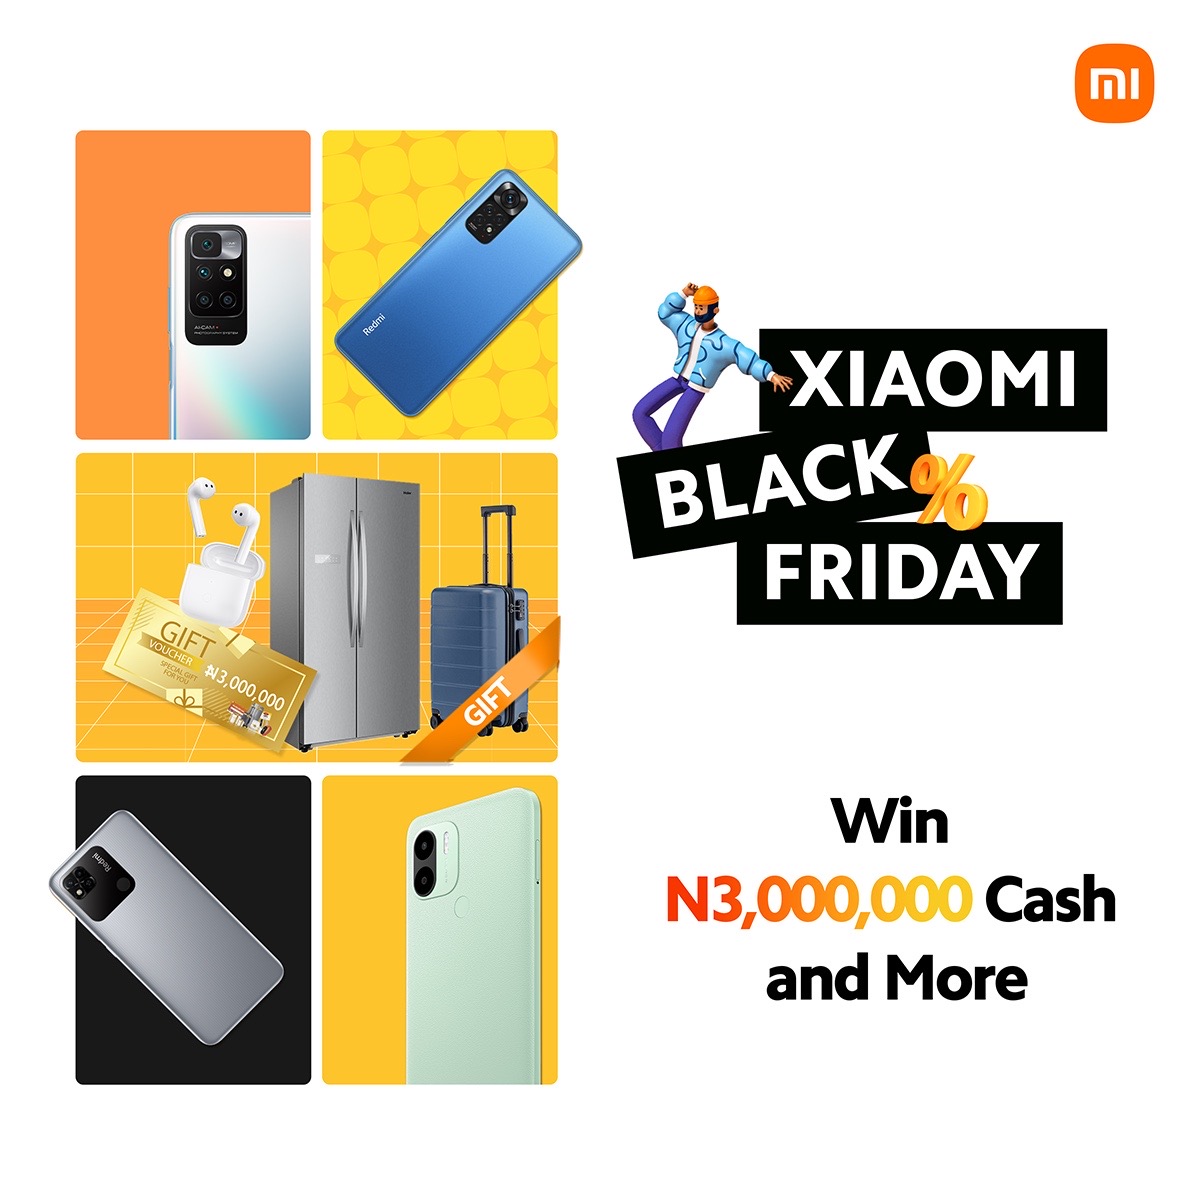 Xiaomi black Friday to offer 3 million naira cash prize, Awesome discounts  & Gifts | BellaNaija